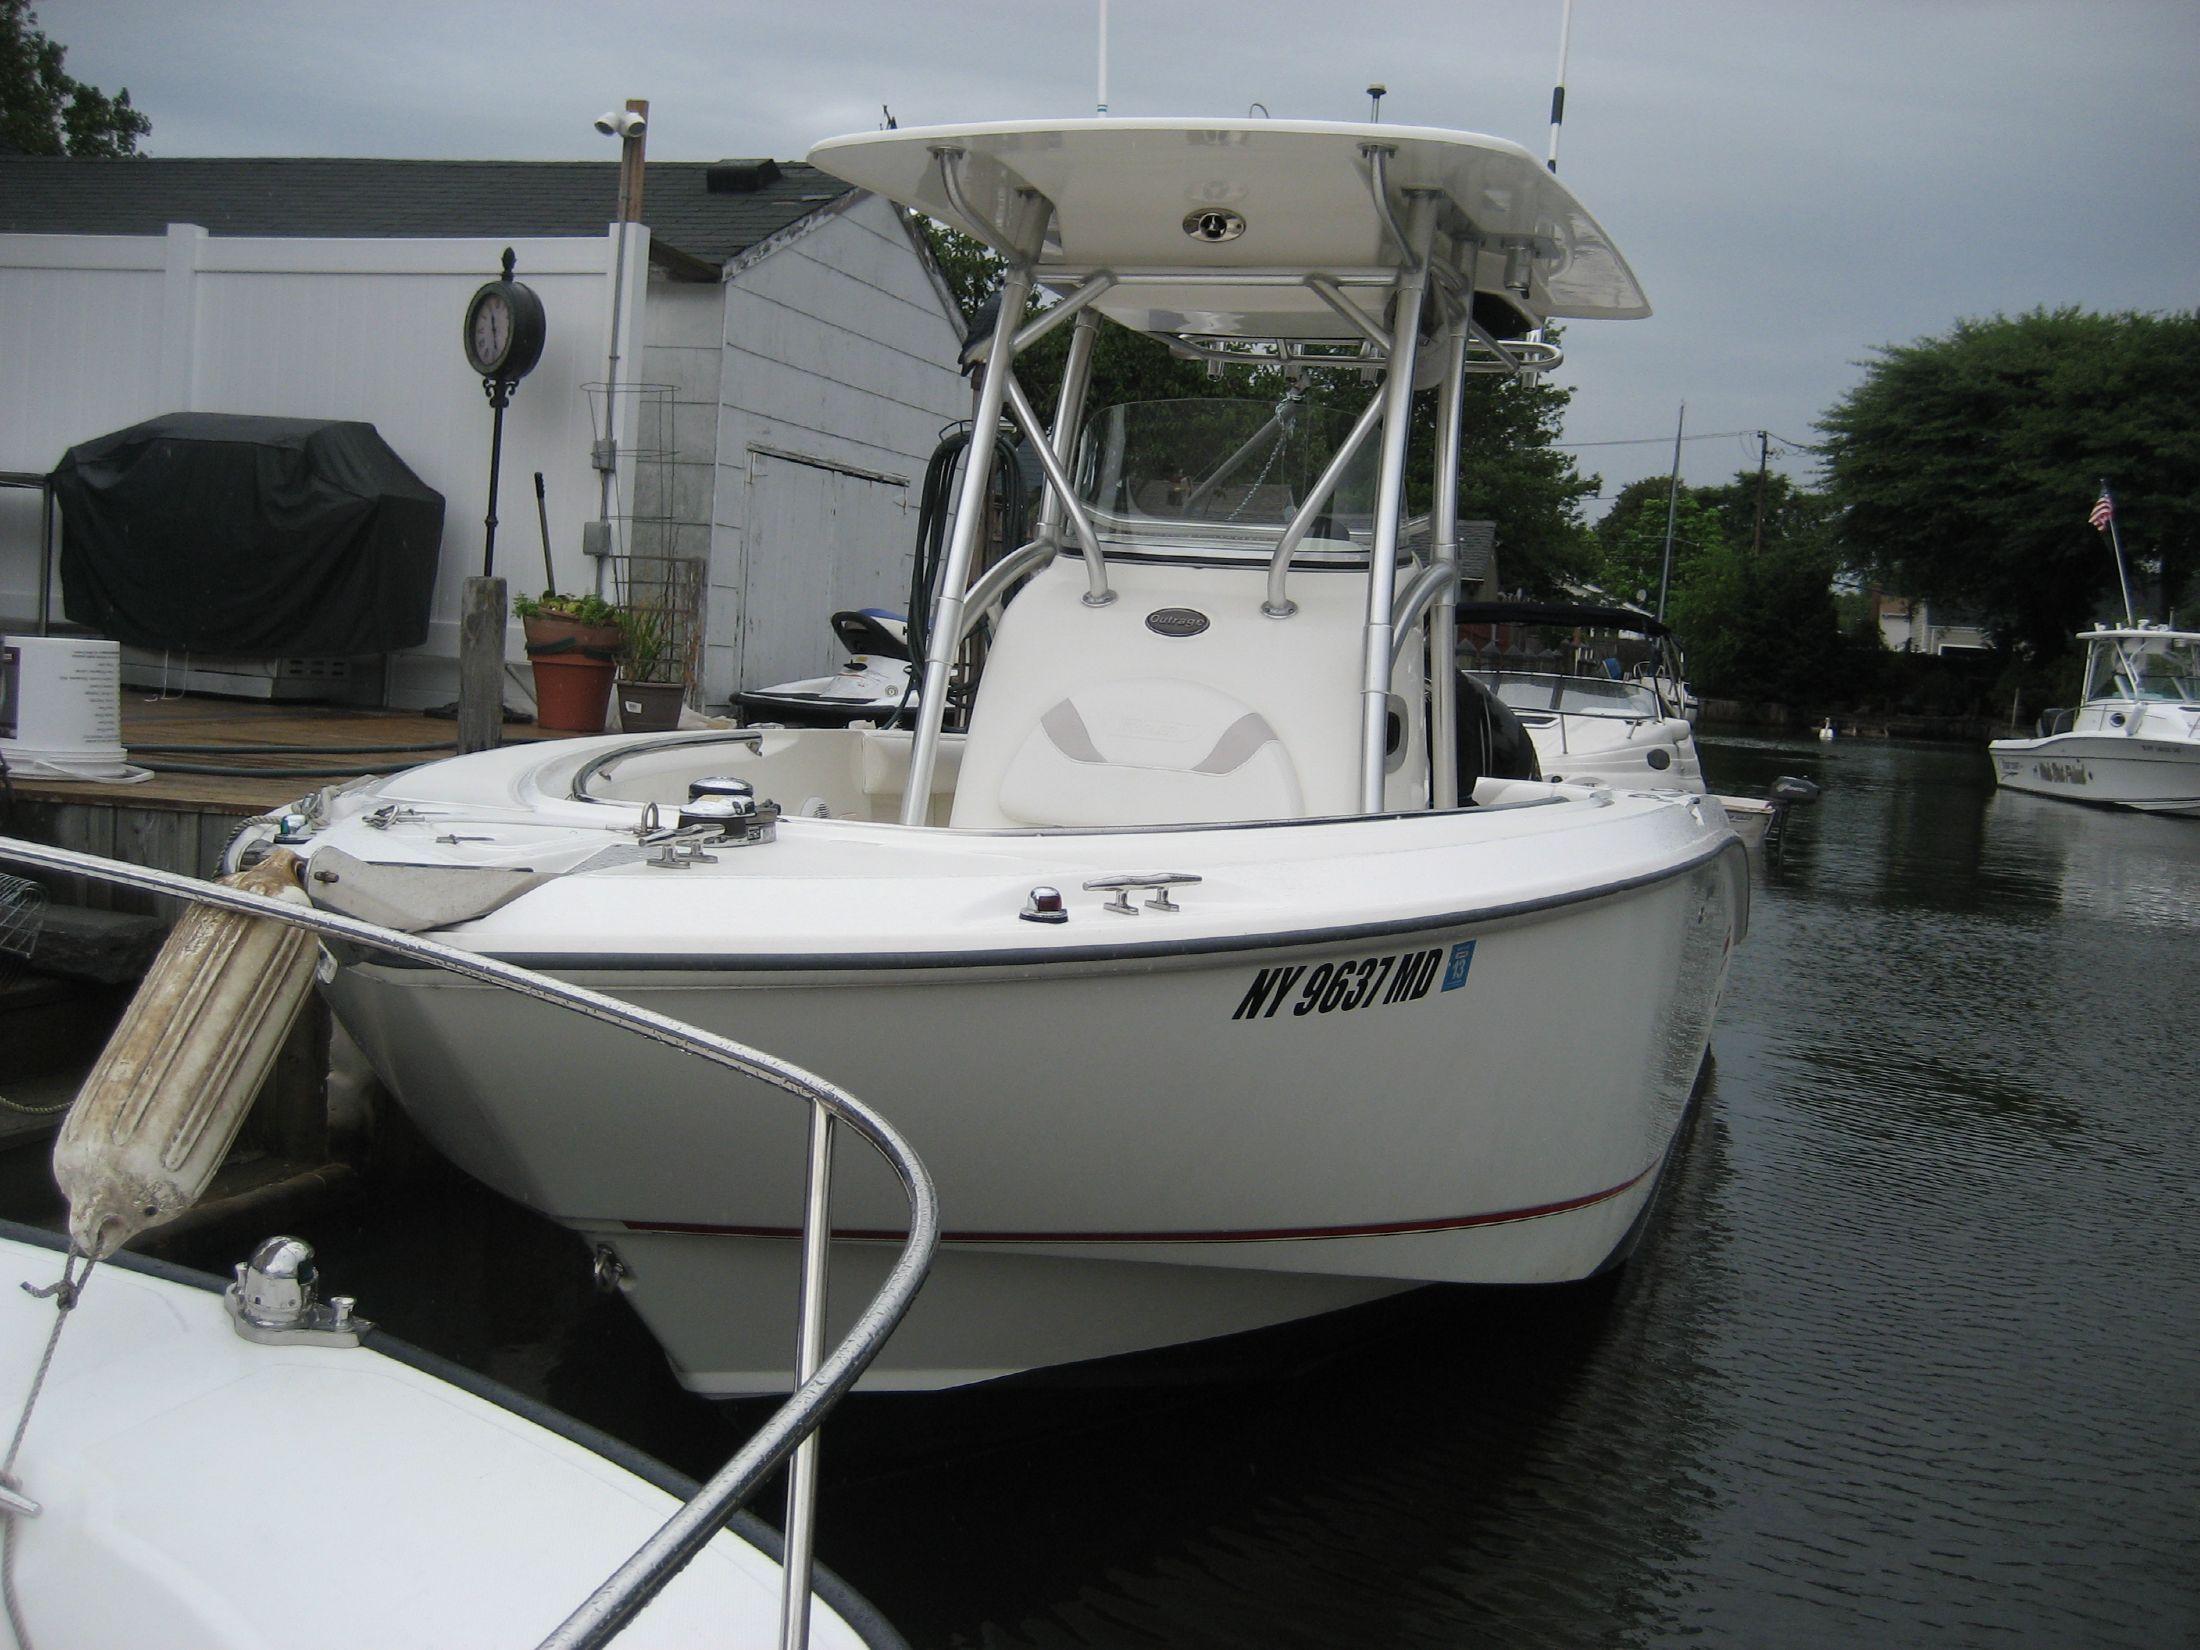 Boston Whaler 240 Outrage (Hard Top, With Trailer), Babylon, Long Island